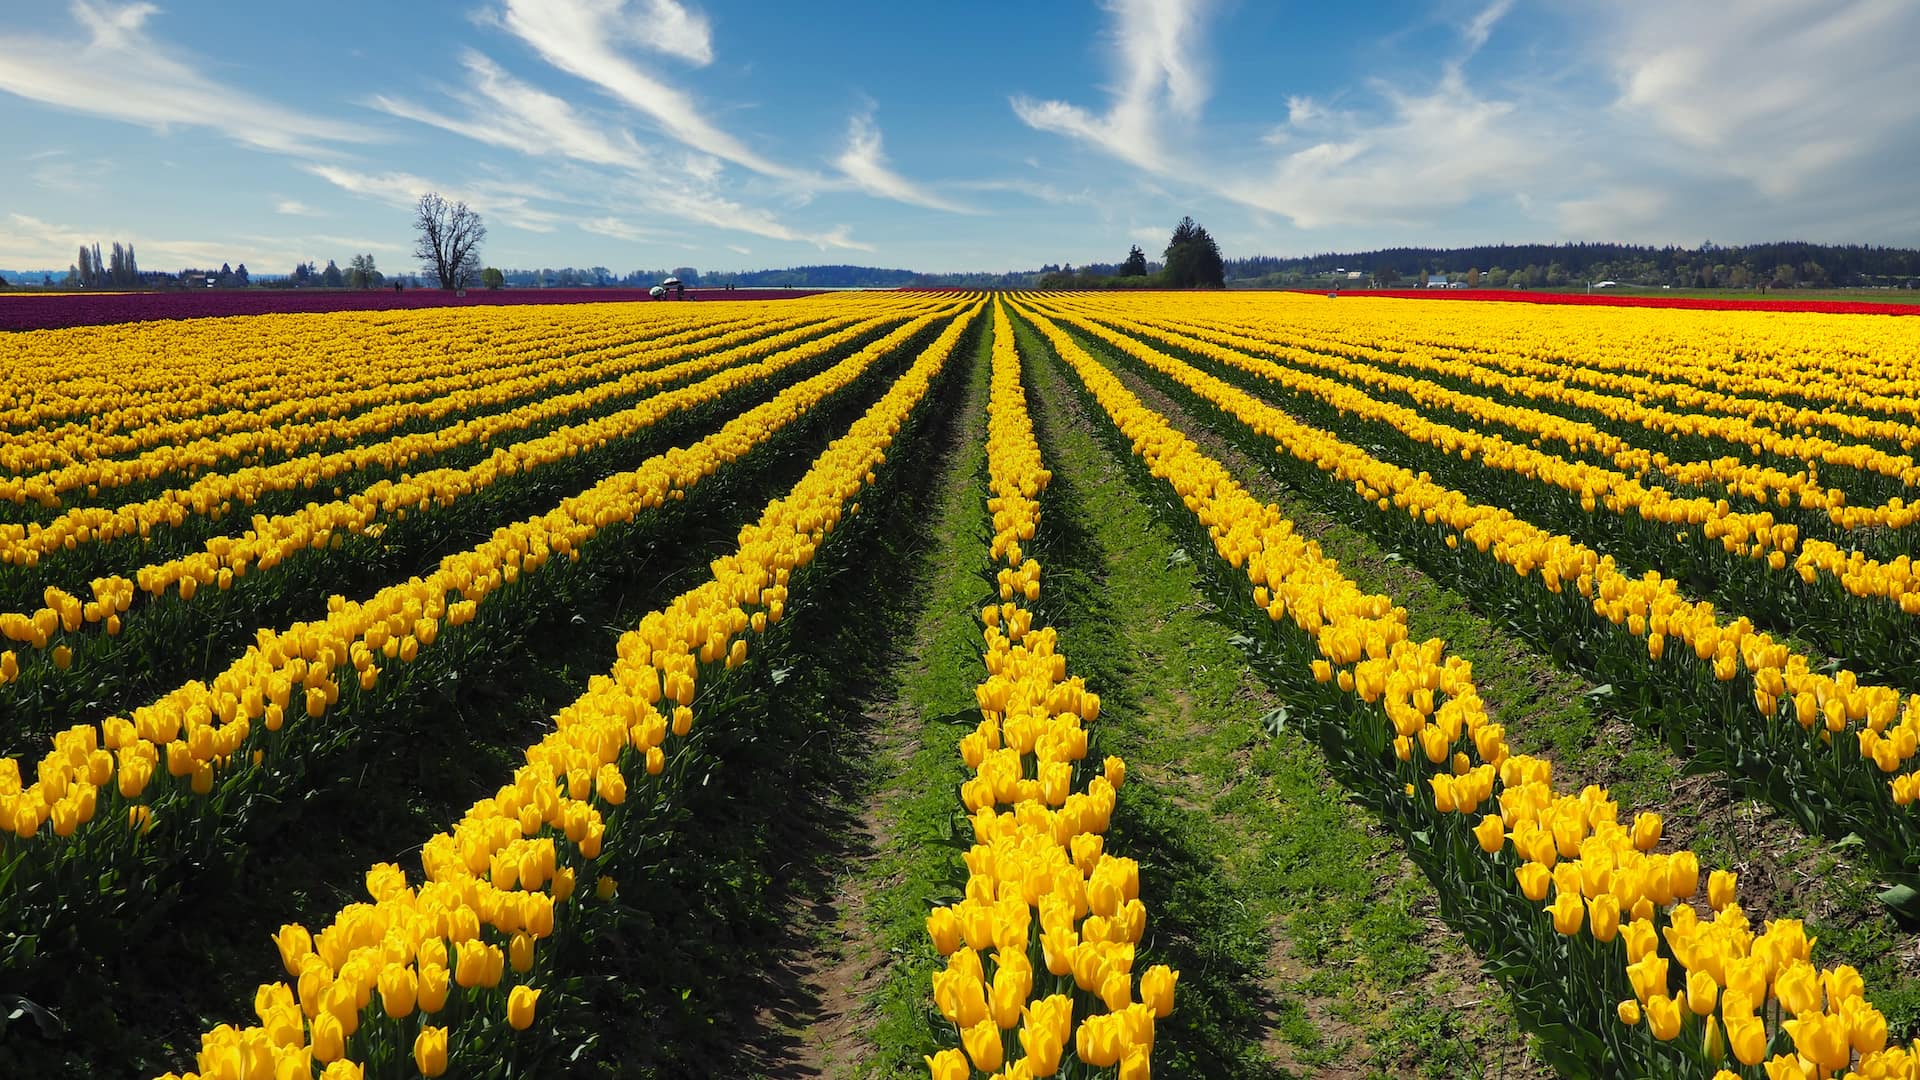 Rows of yellow flowers lead into the background